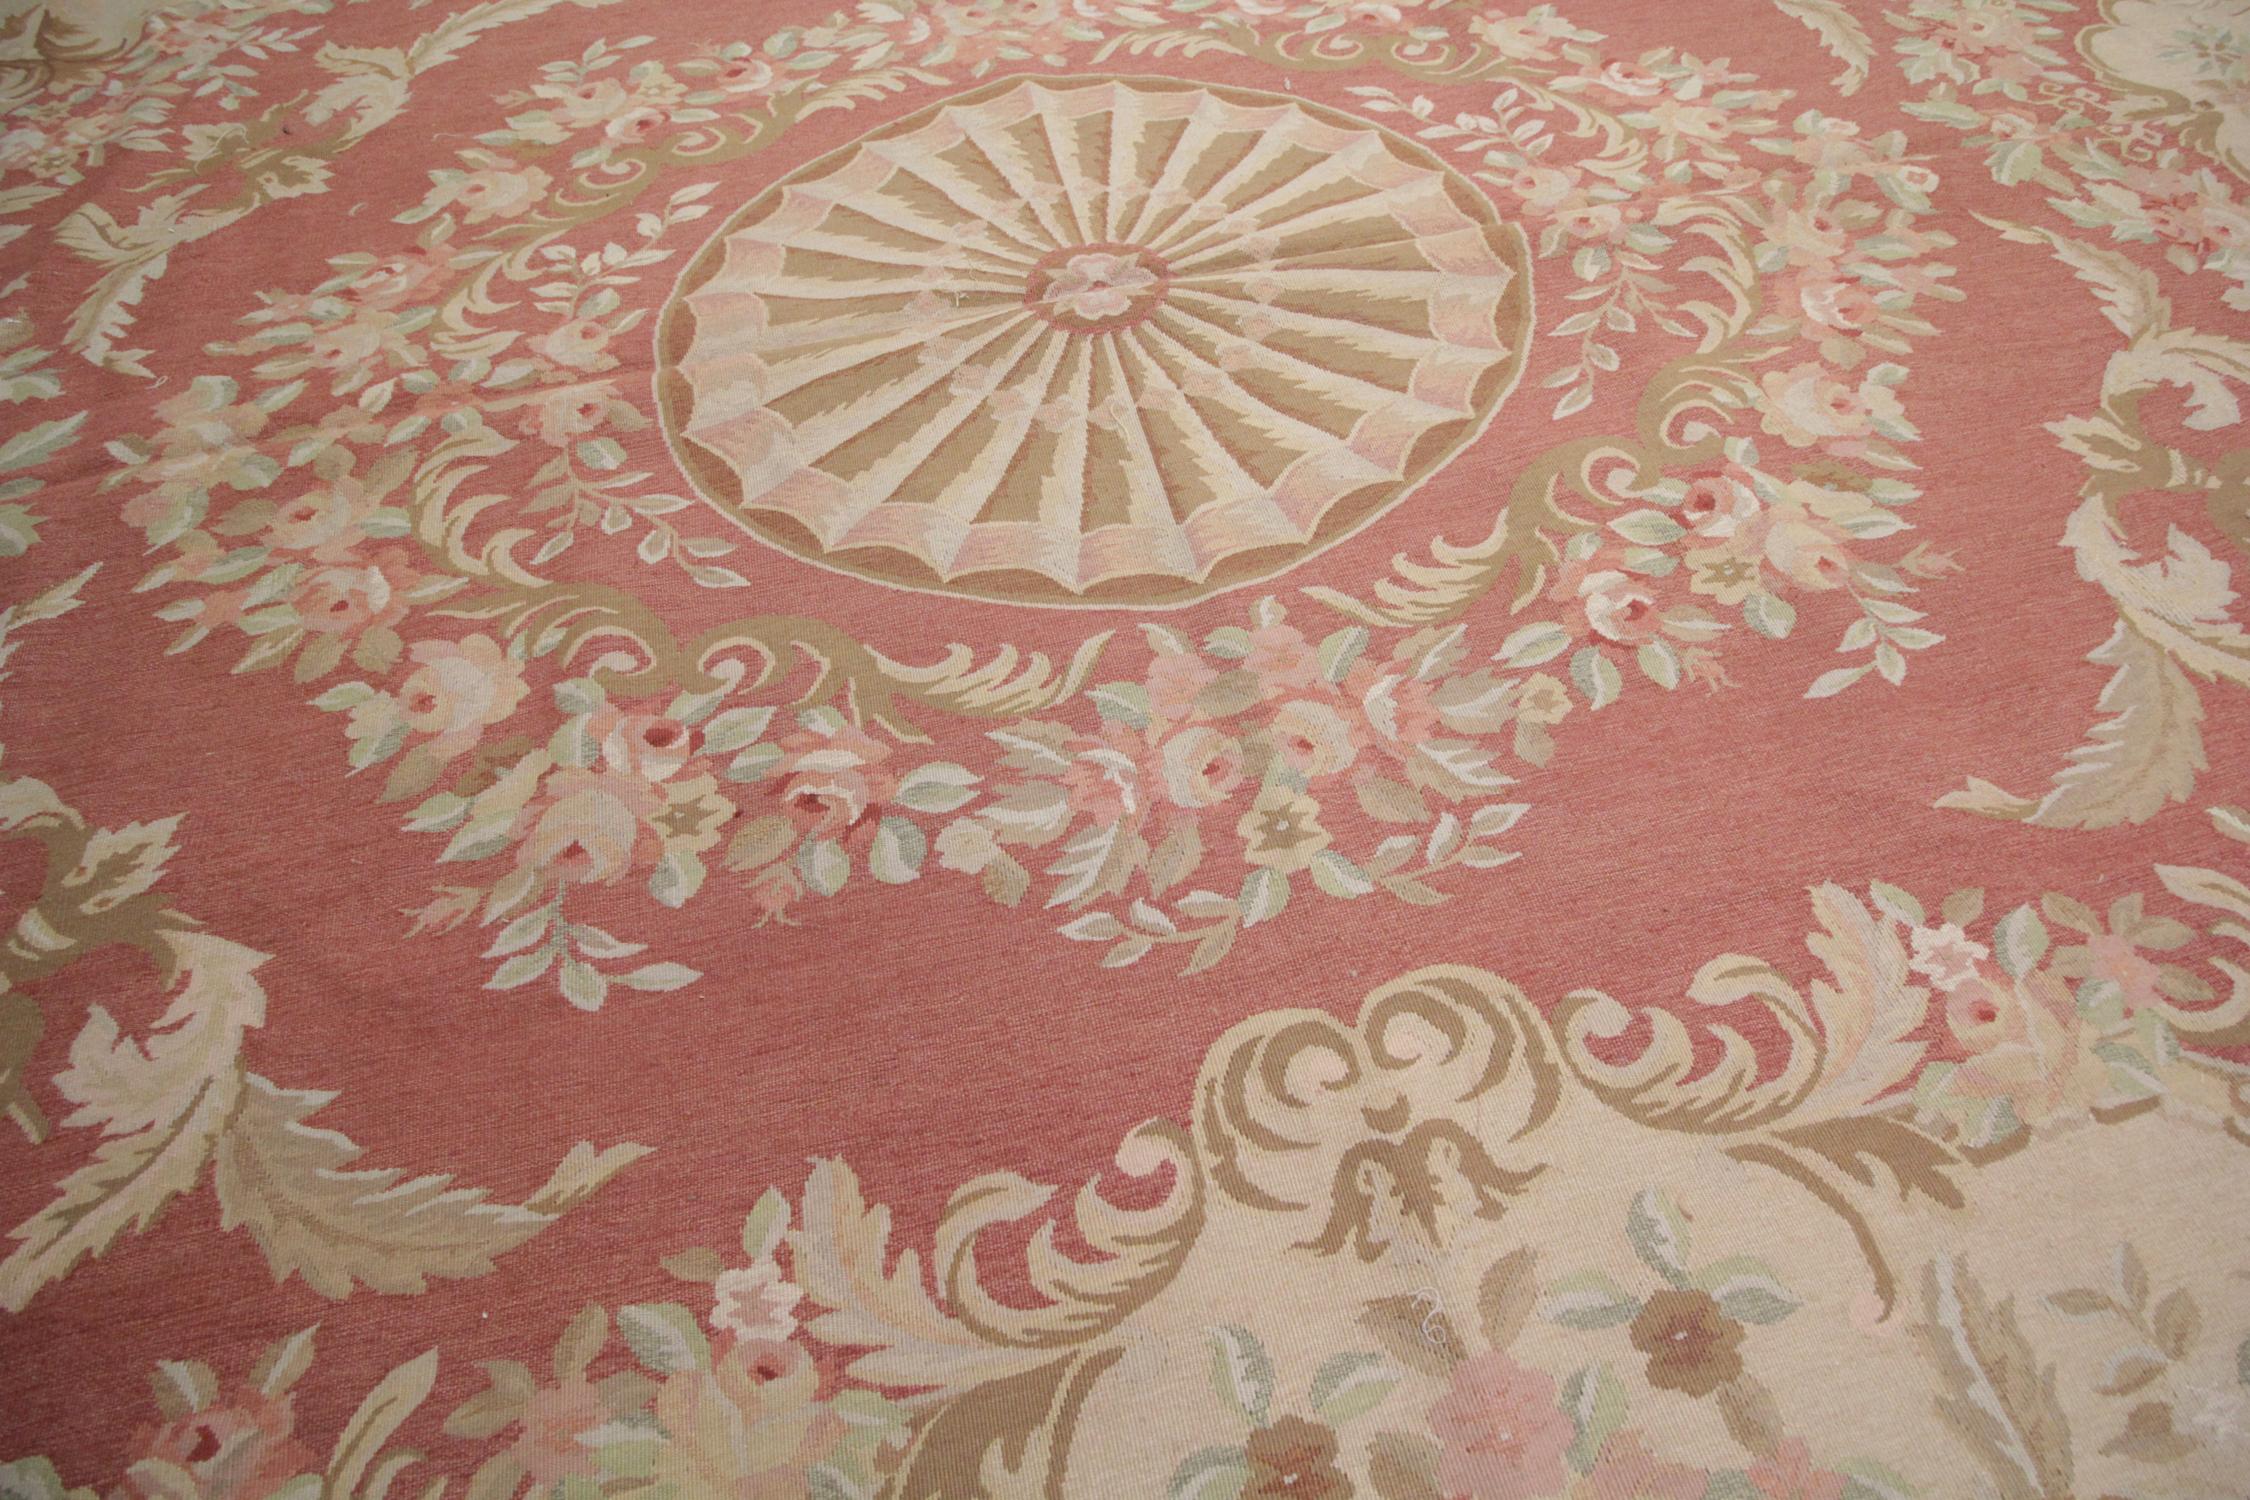 Chinese Handmade Carpet Vintage Aubusson Style Rug 1980 French- Pink and Beige Wool Rugs For Sale